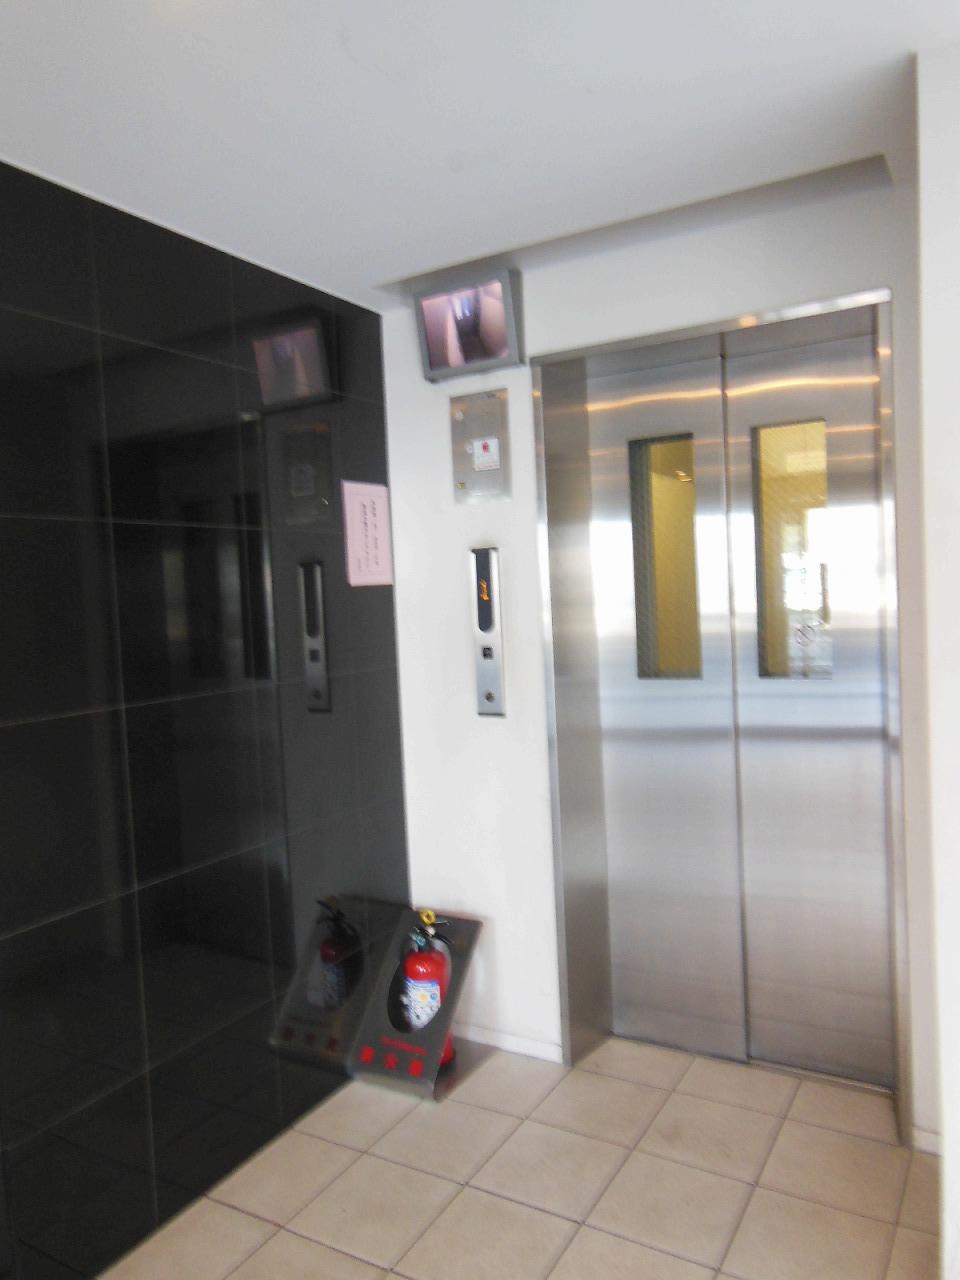 Other common areas. The first floor elevator landing.